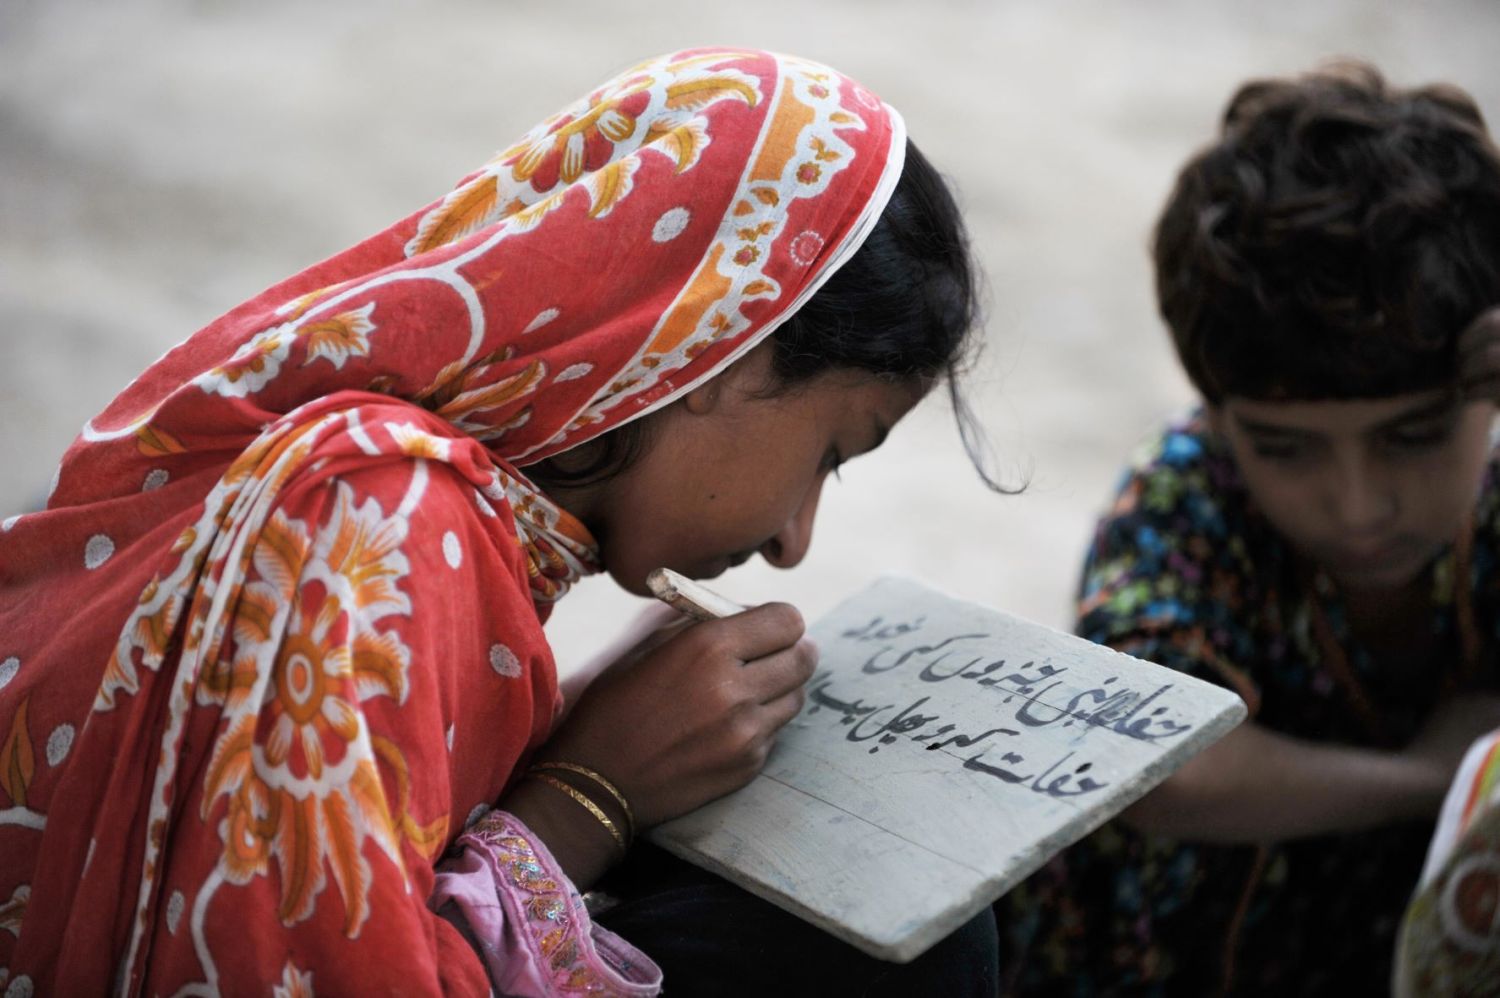 A Pakistani girl studies in the classroom.